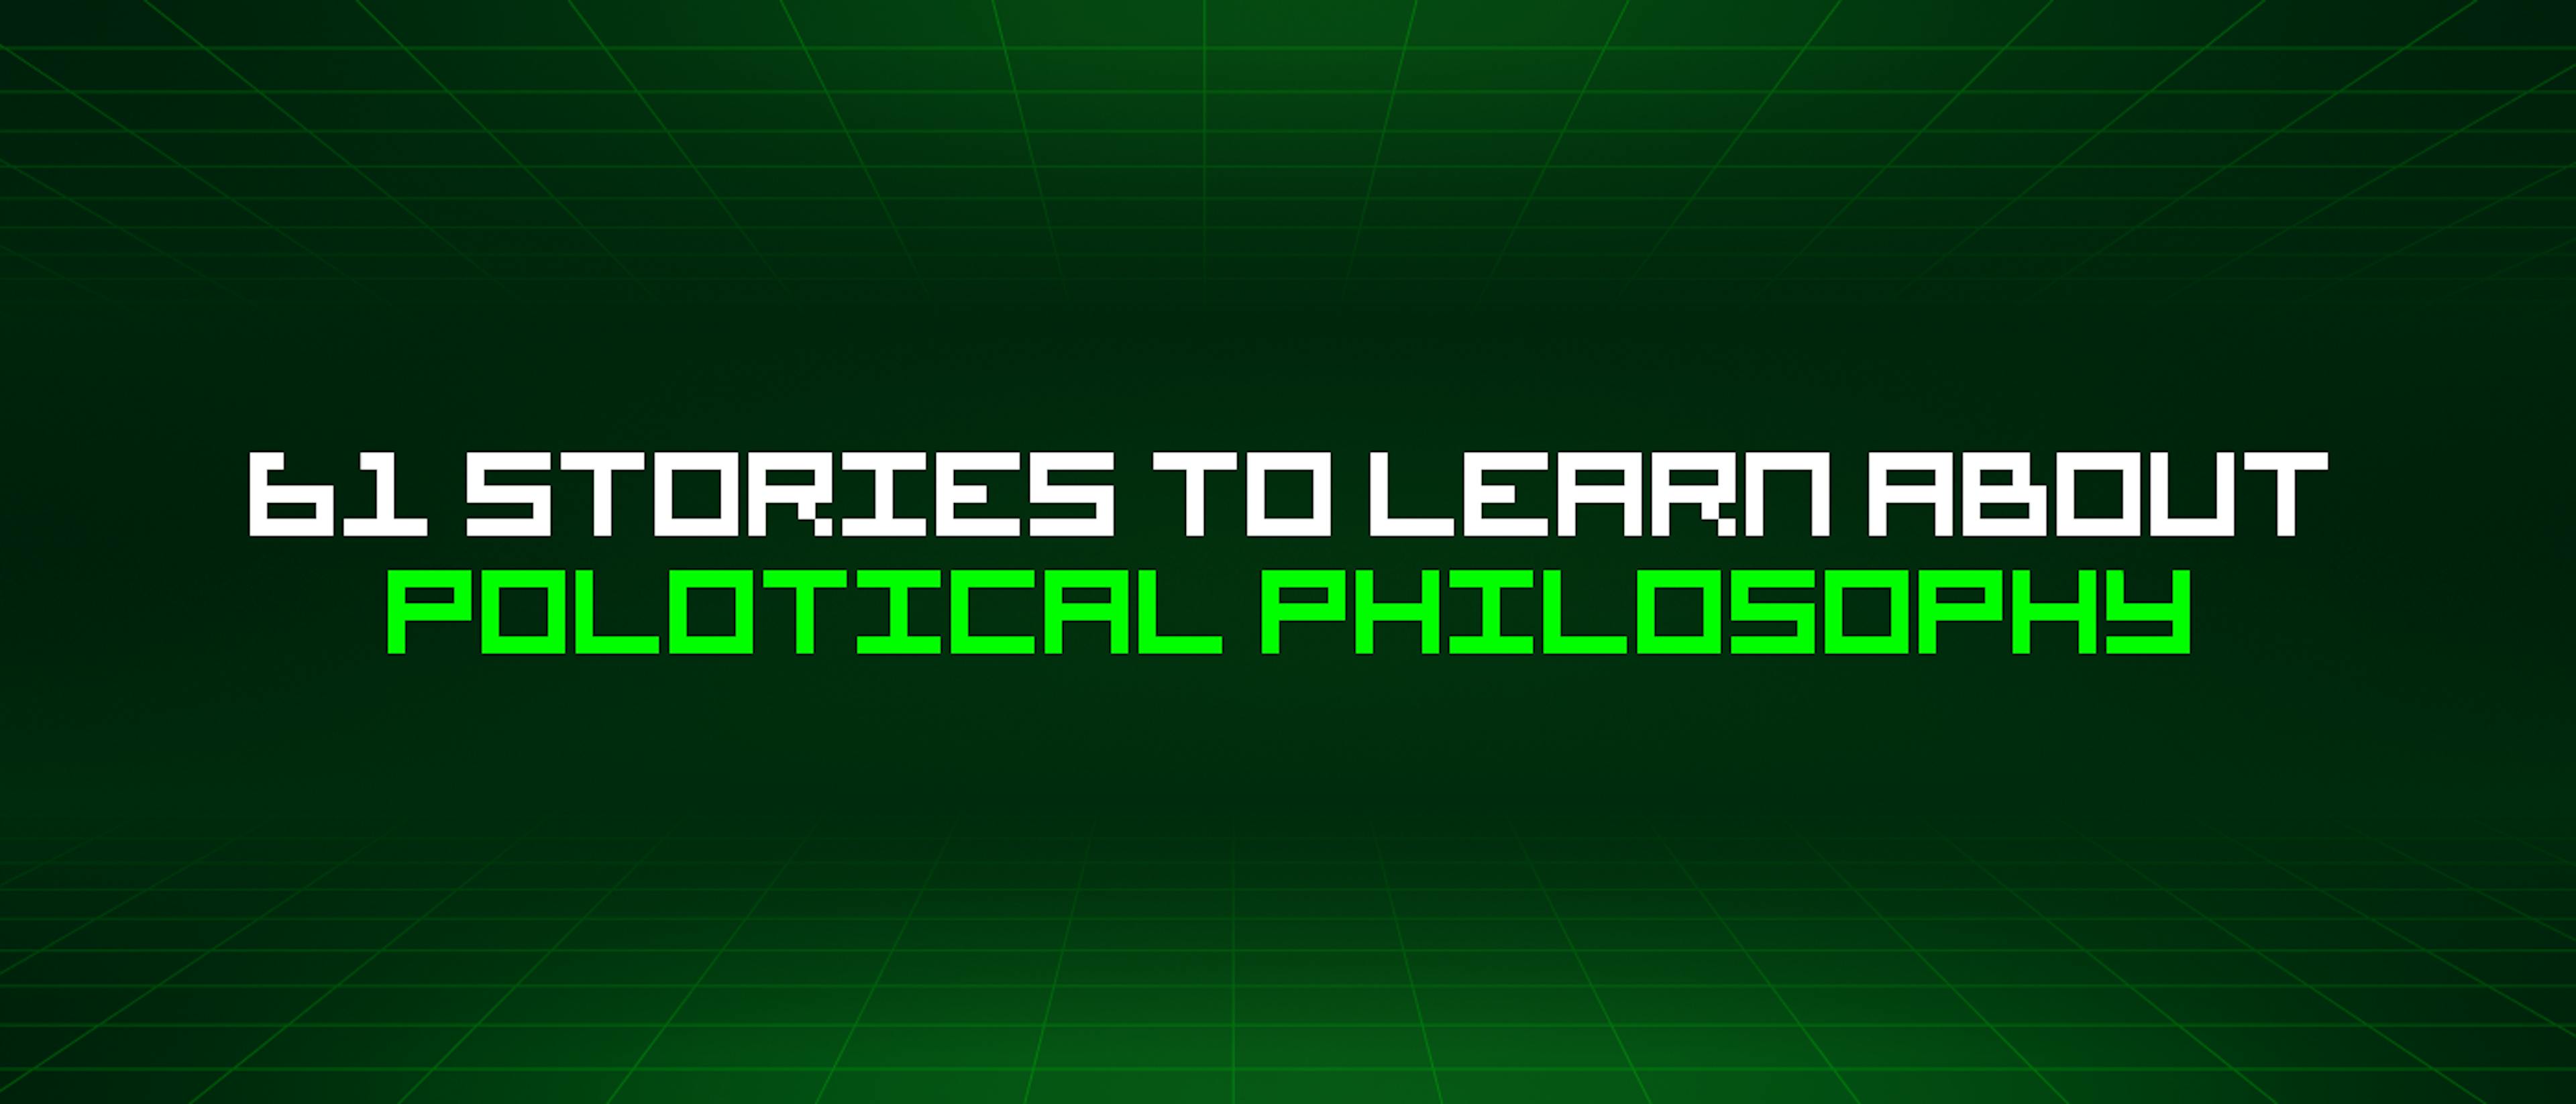 featured image - 61 Stories To Learn About Polotical Philosophy